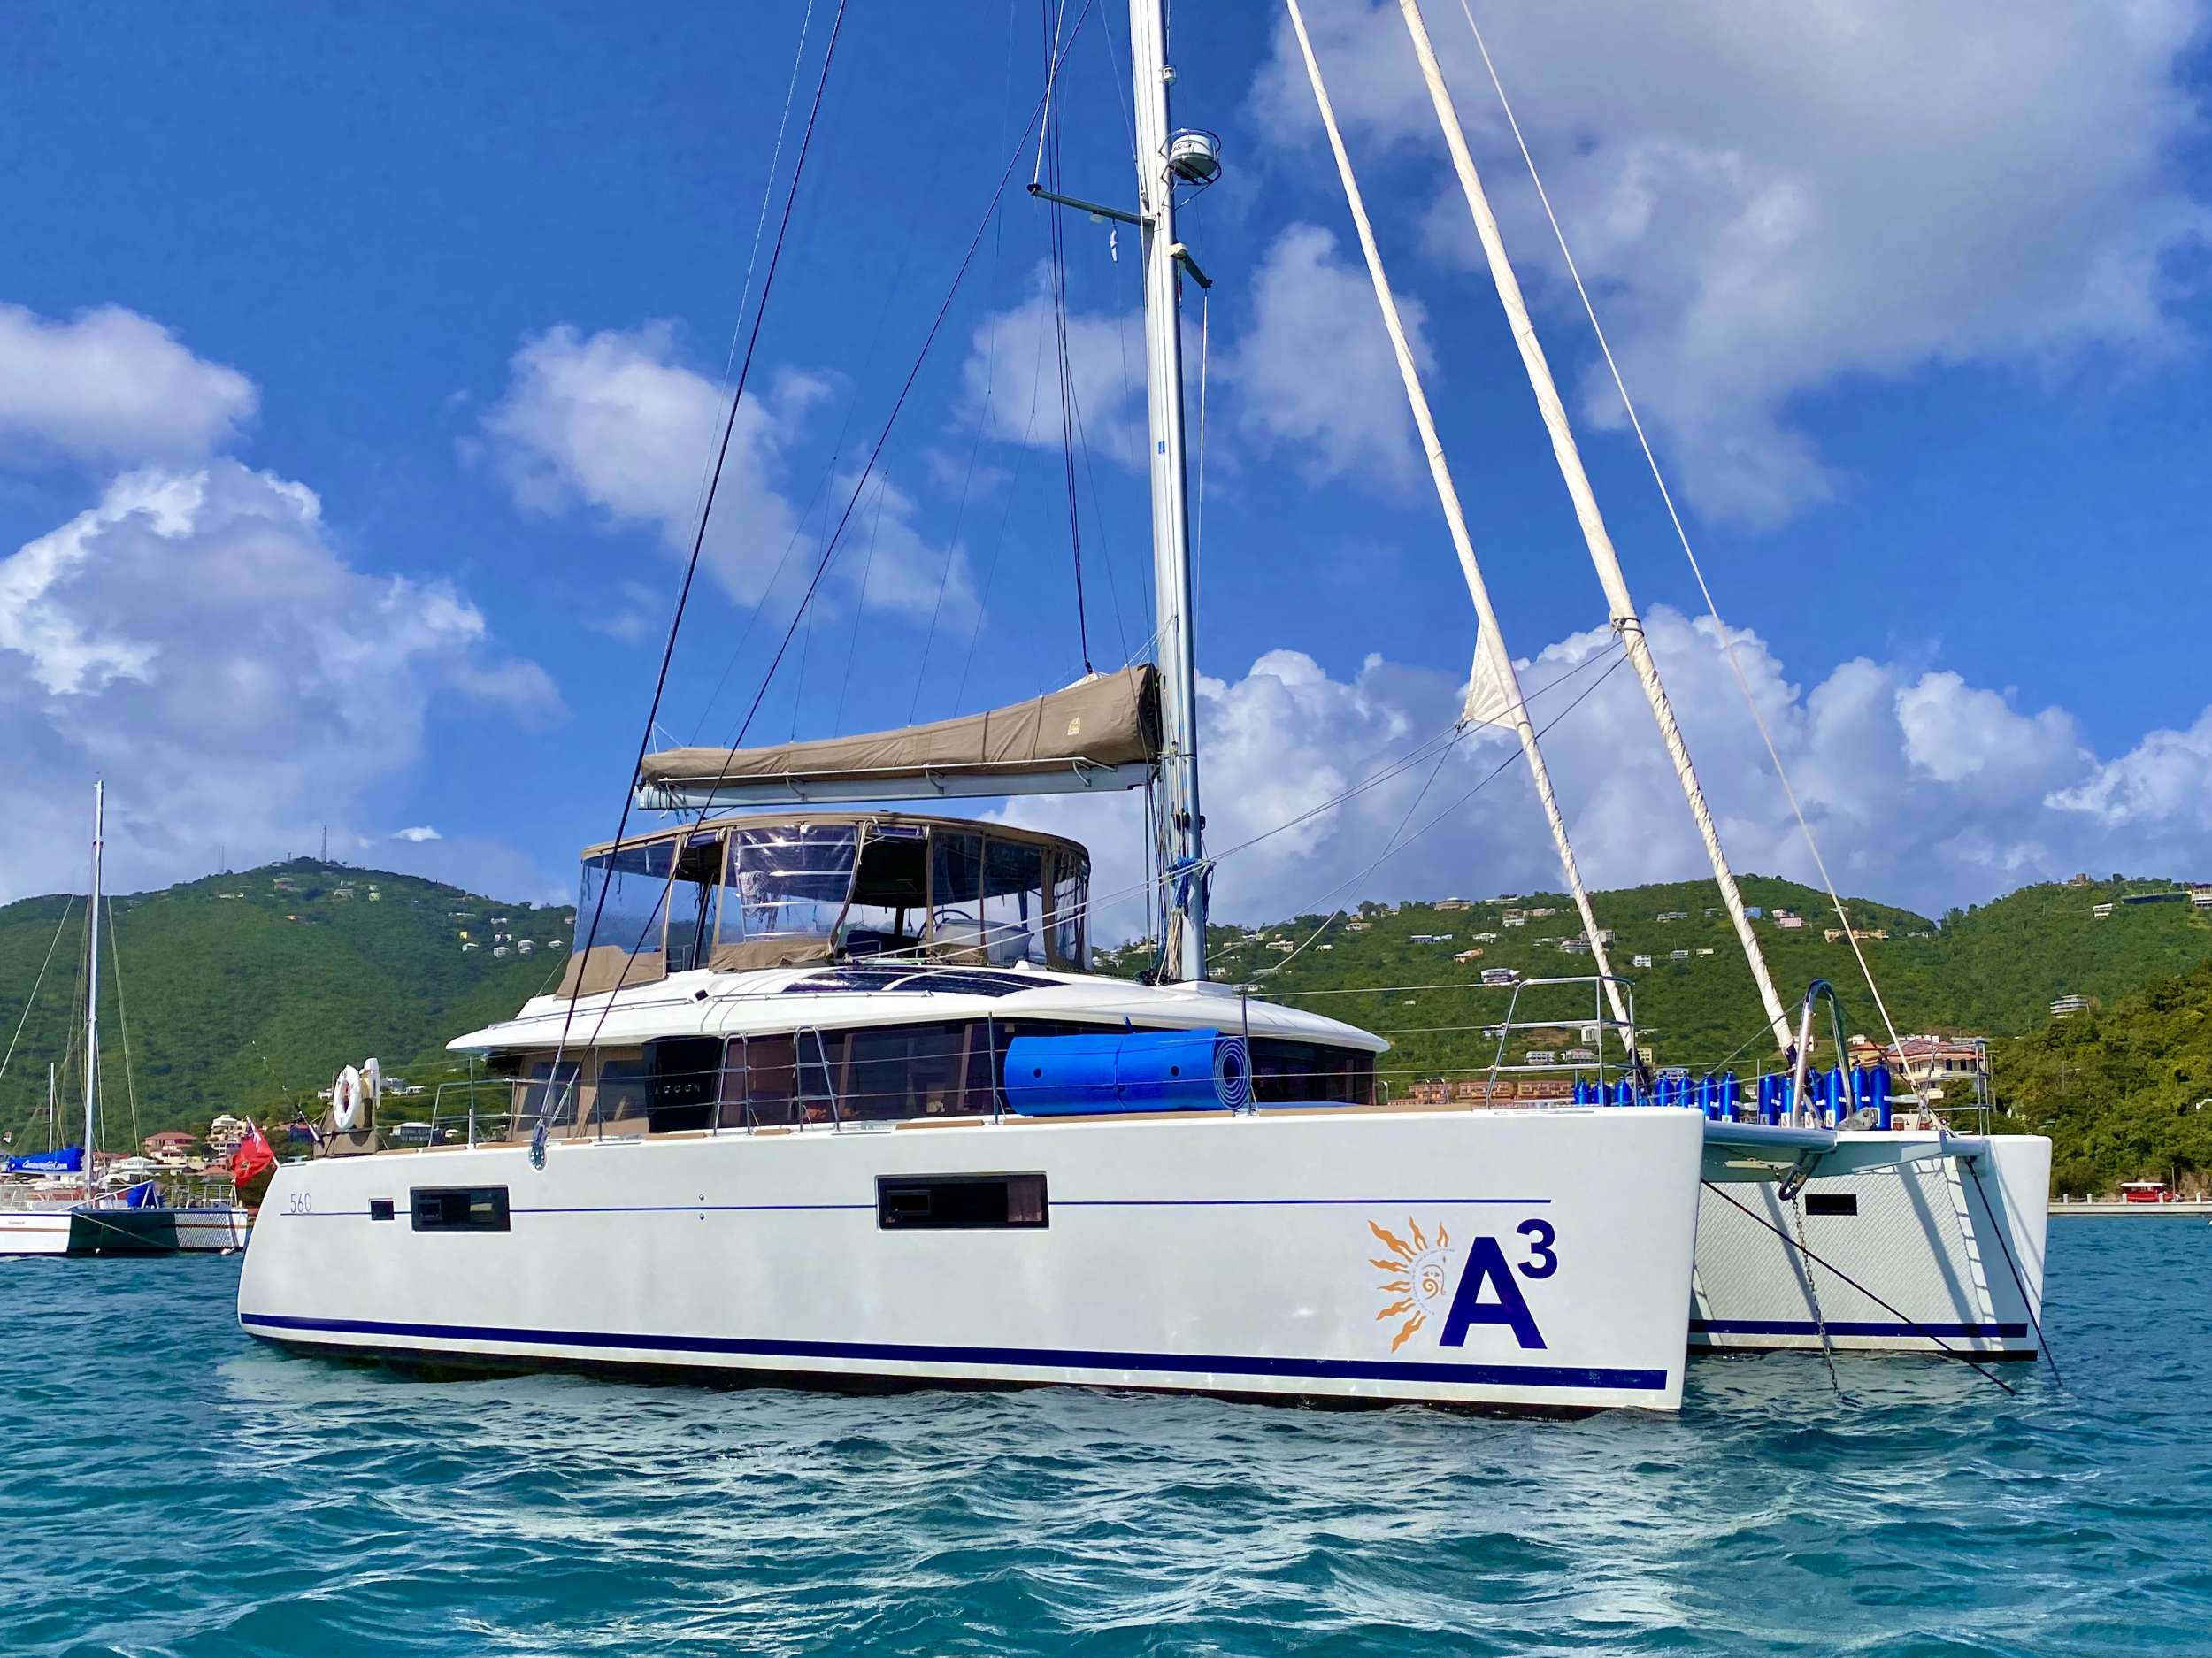 A3 Yacht Charter - Ritzy Charters